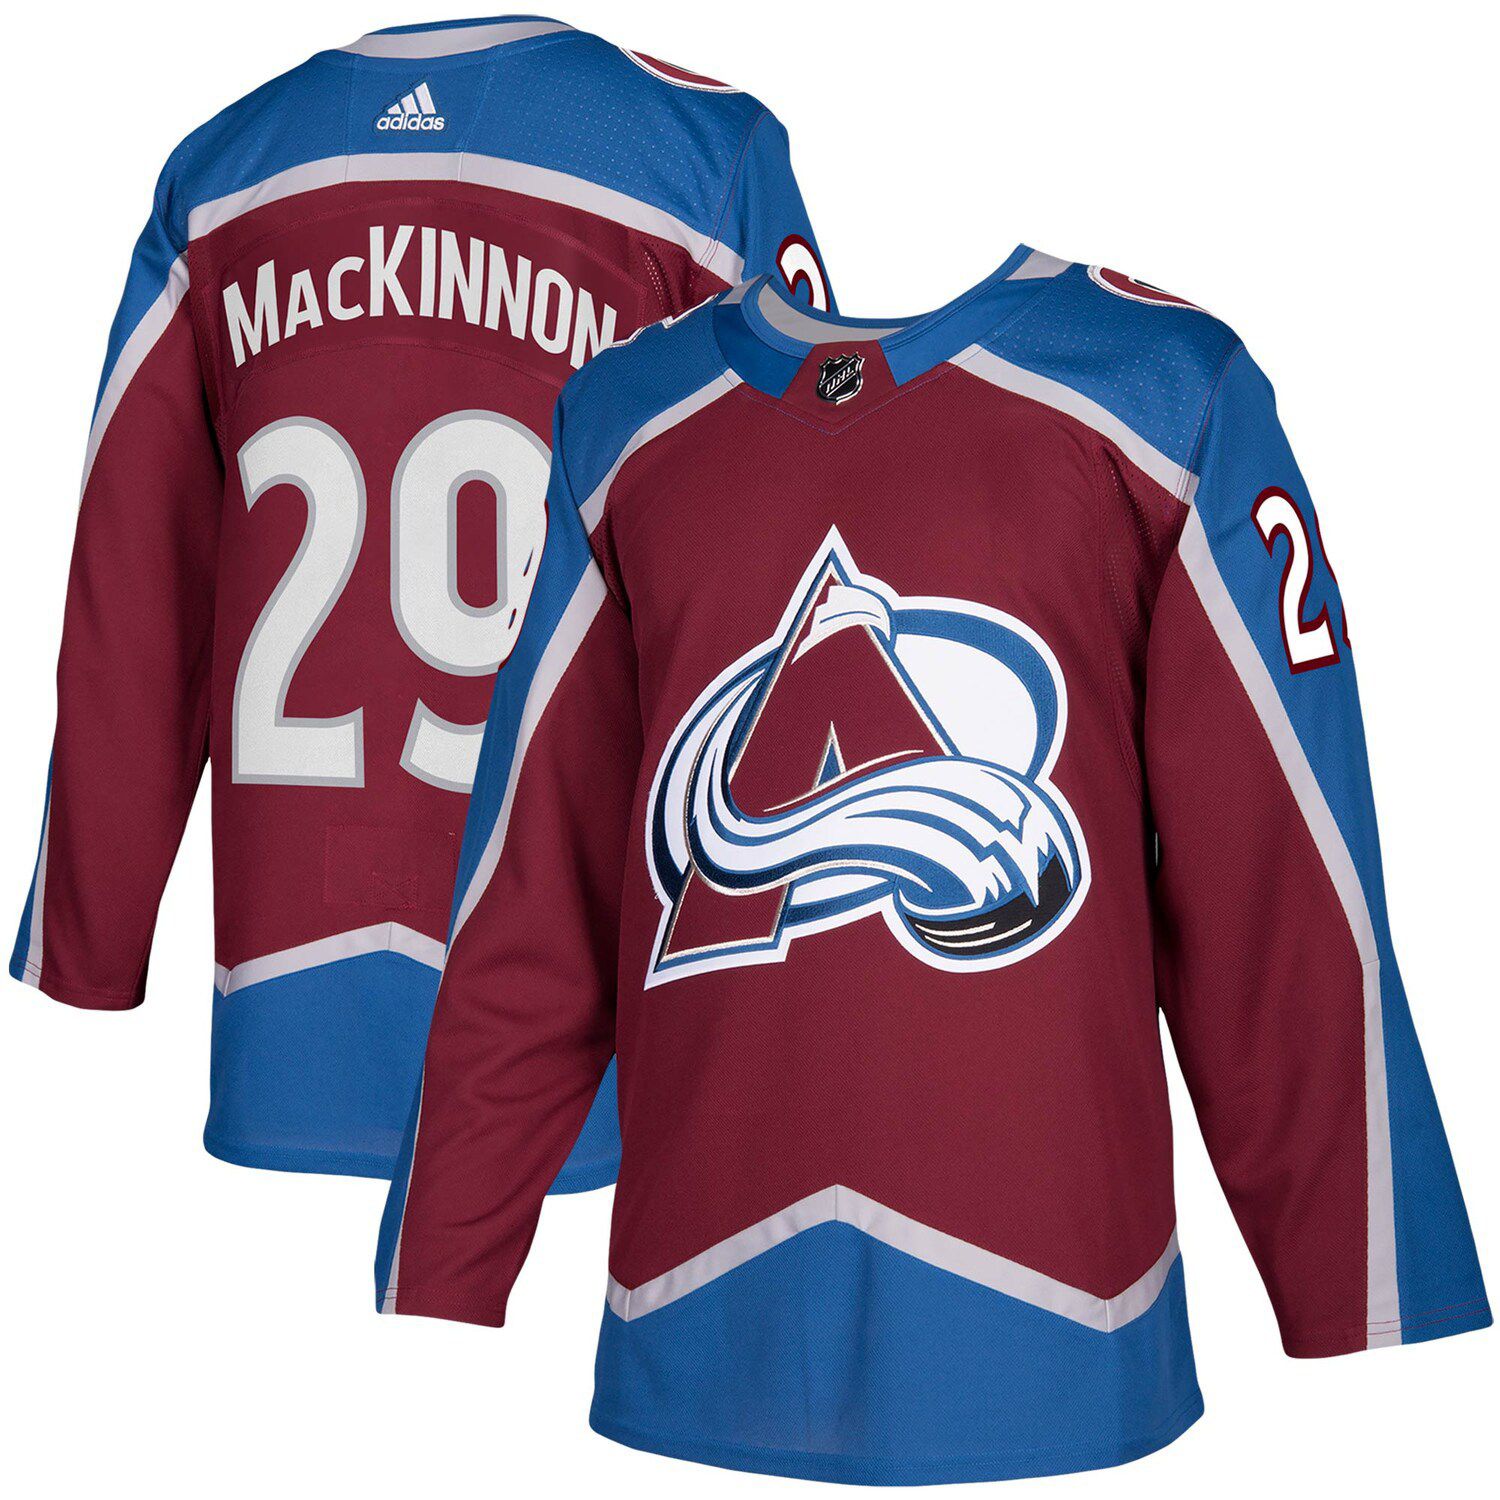 nathan mackinnon jersey number